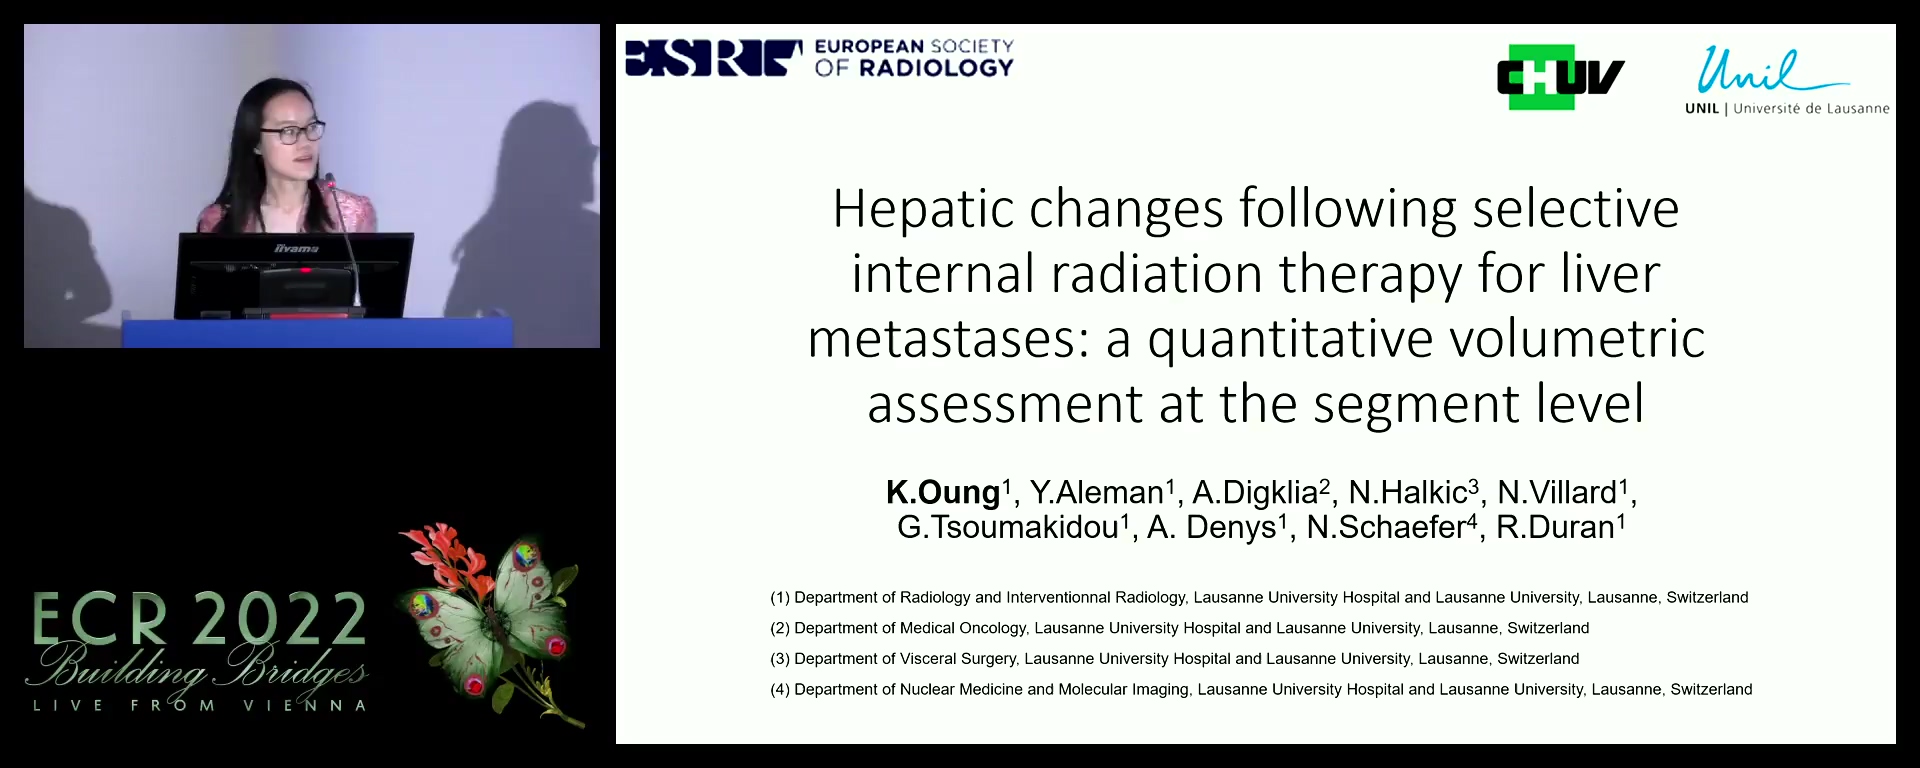 Hepatic changes following selective internal radiation therapy for liver metastases: a quantitative volumetric assessment at the segment level - Karine Oung, Lausanne / CH